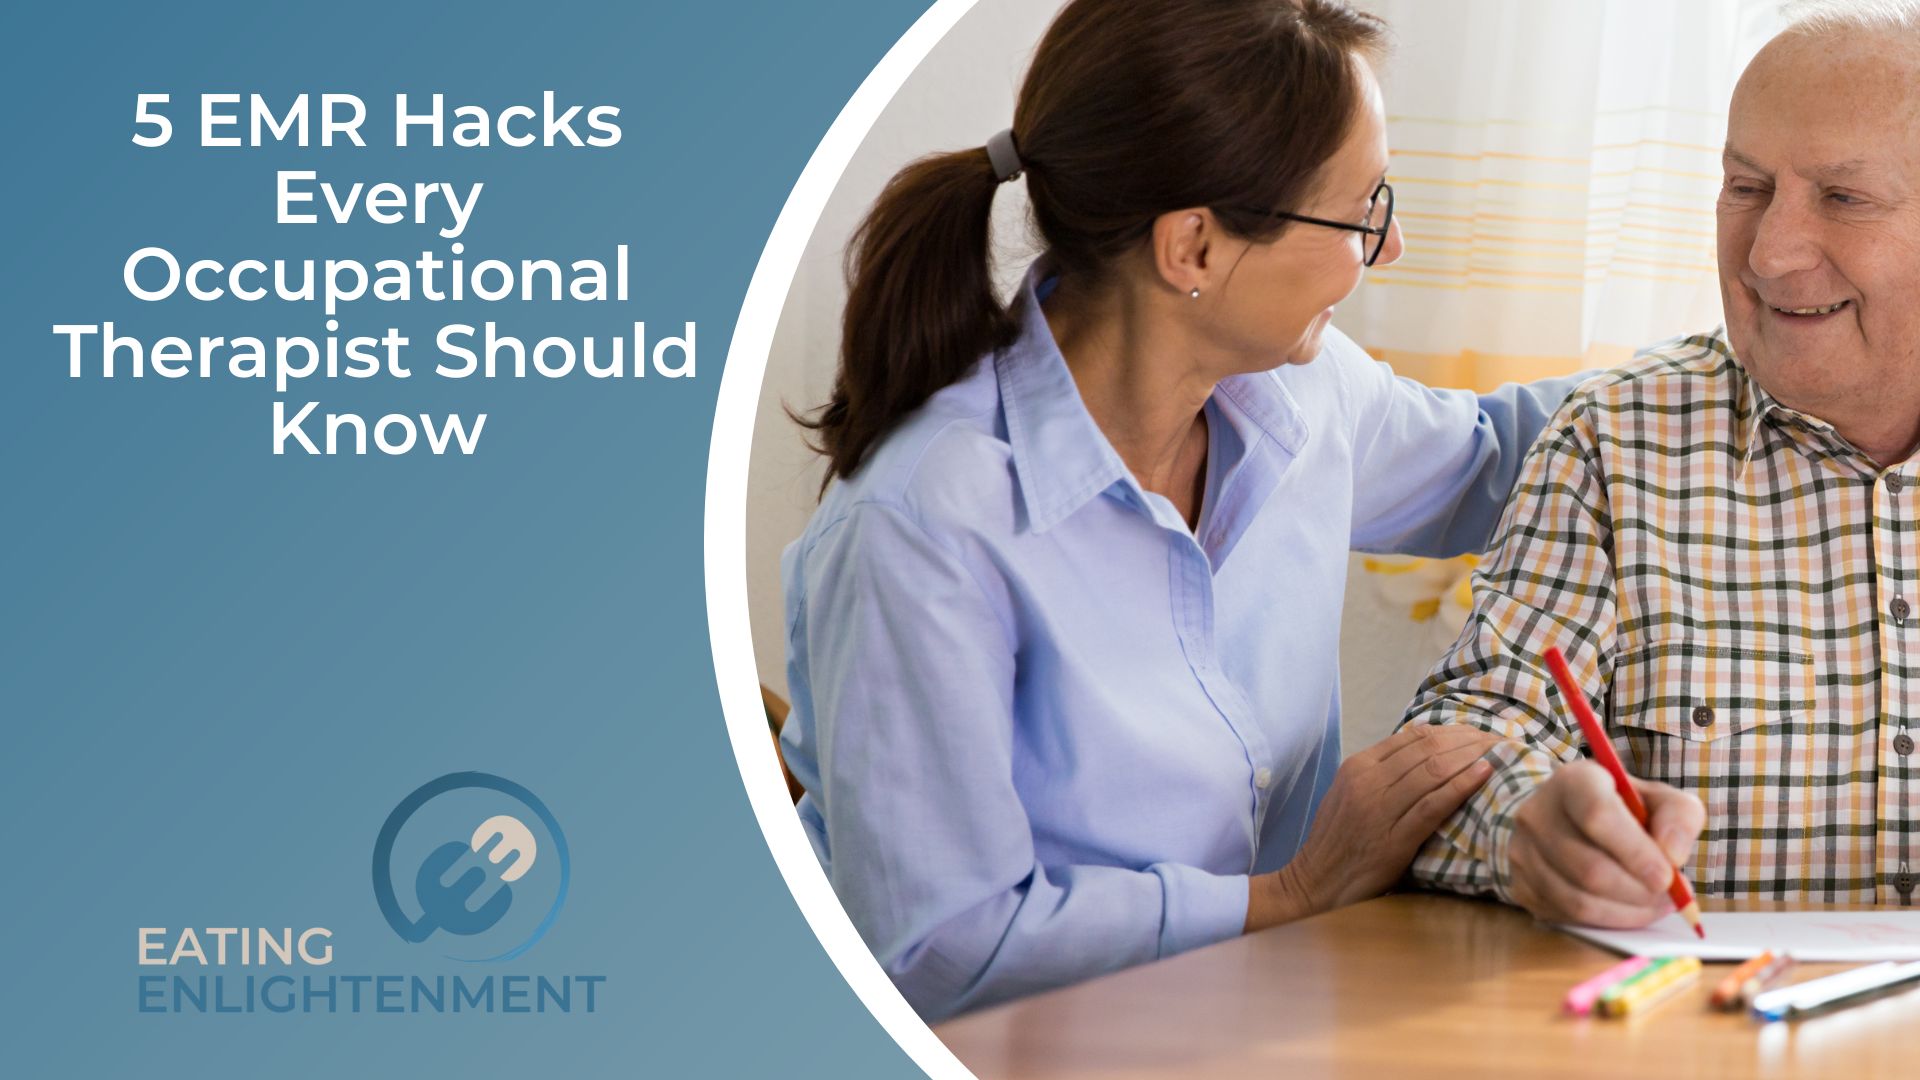 5 EMR Hacks Every Occupational Therapist Should Know